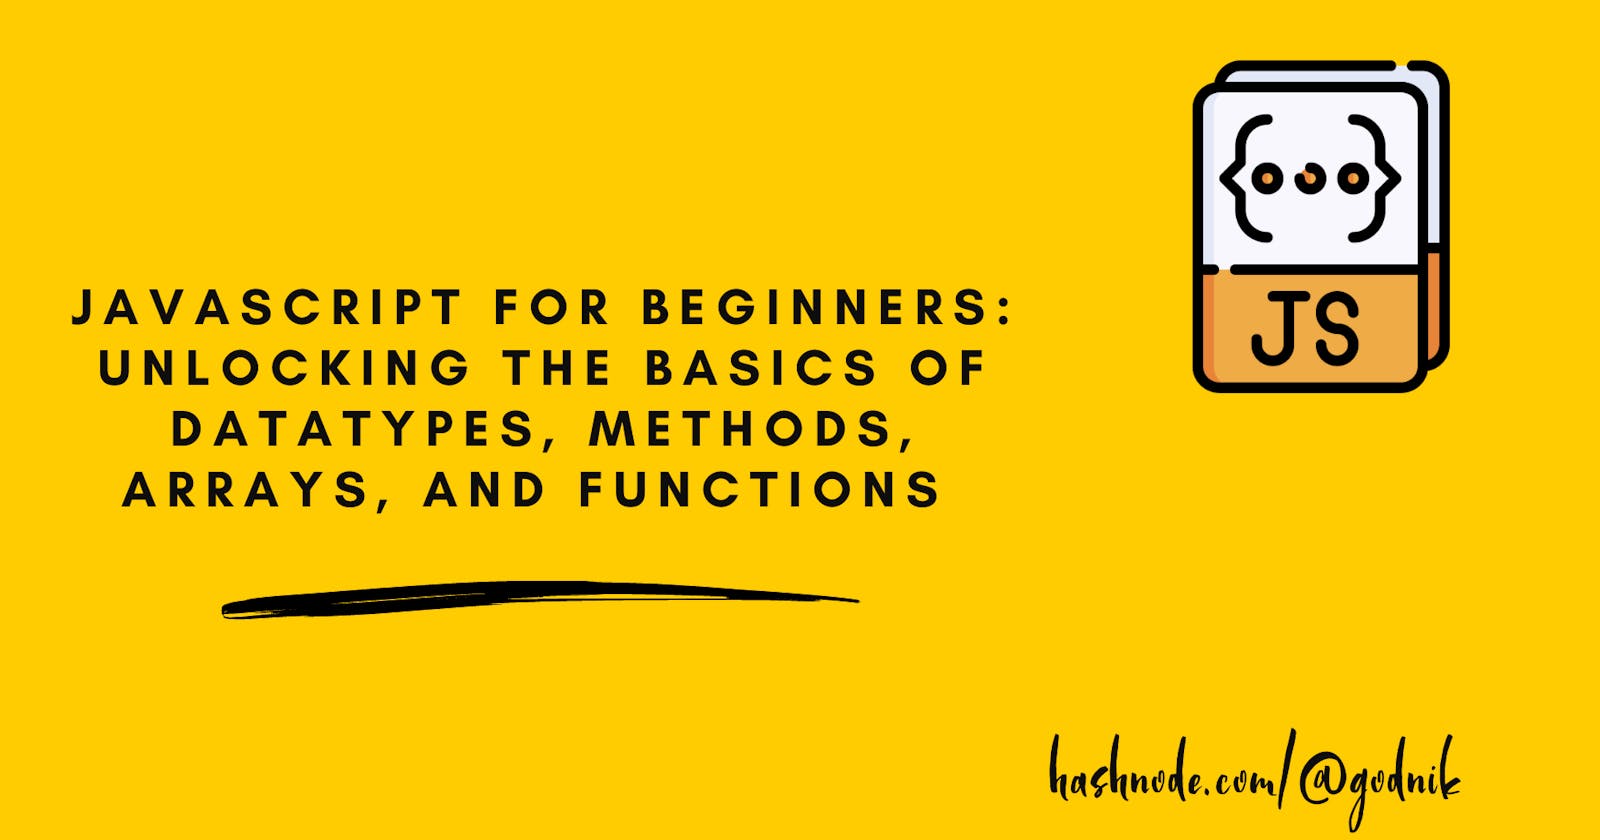 JavaScript for Beginners: Unlocking the Basics of Datatypes, Methods, Arrays, and Functions